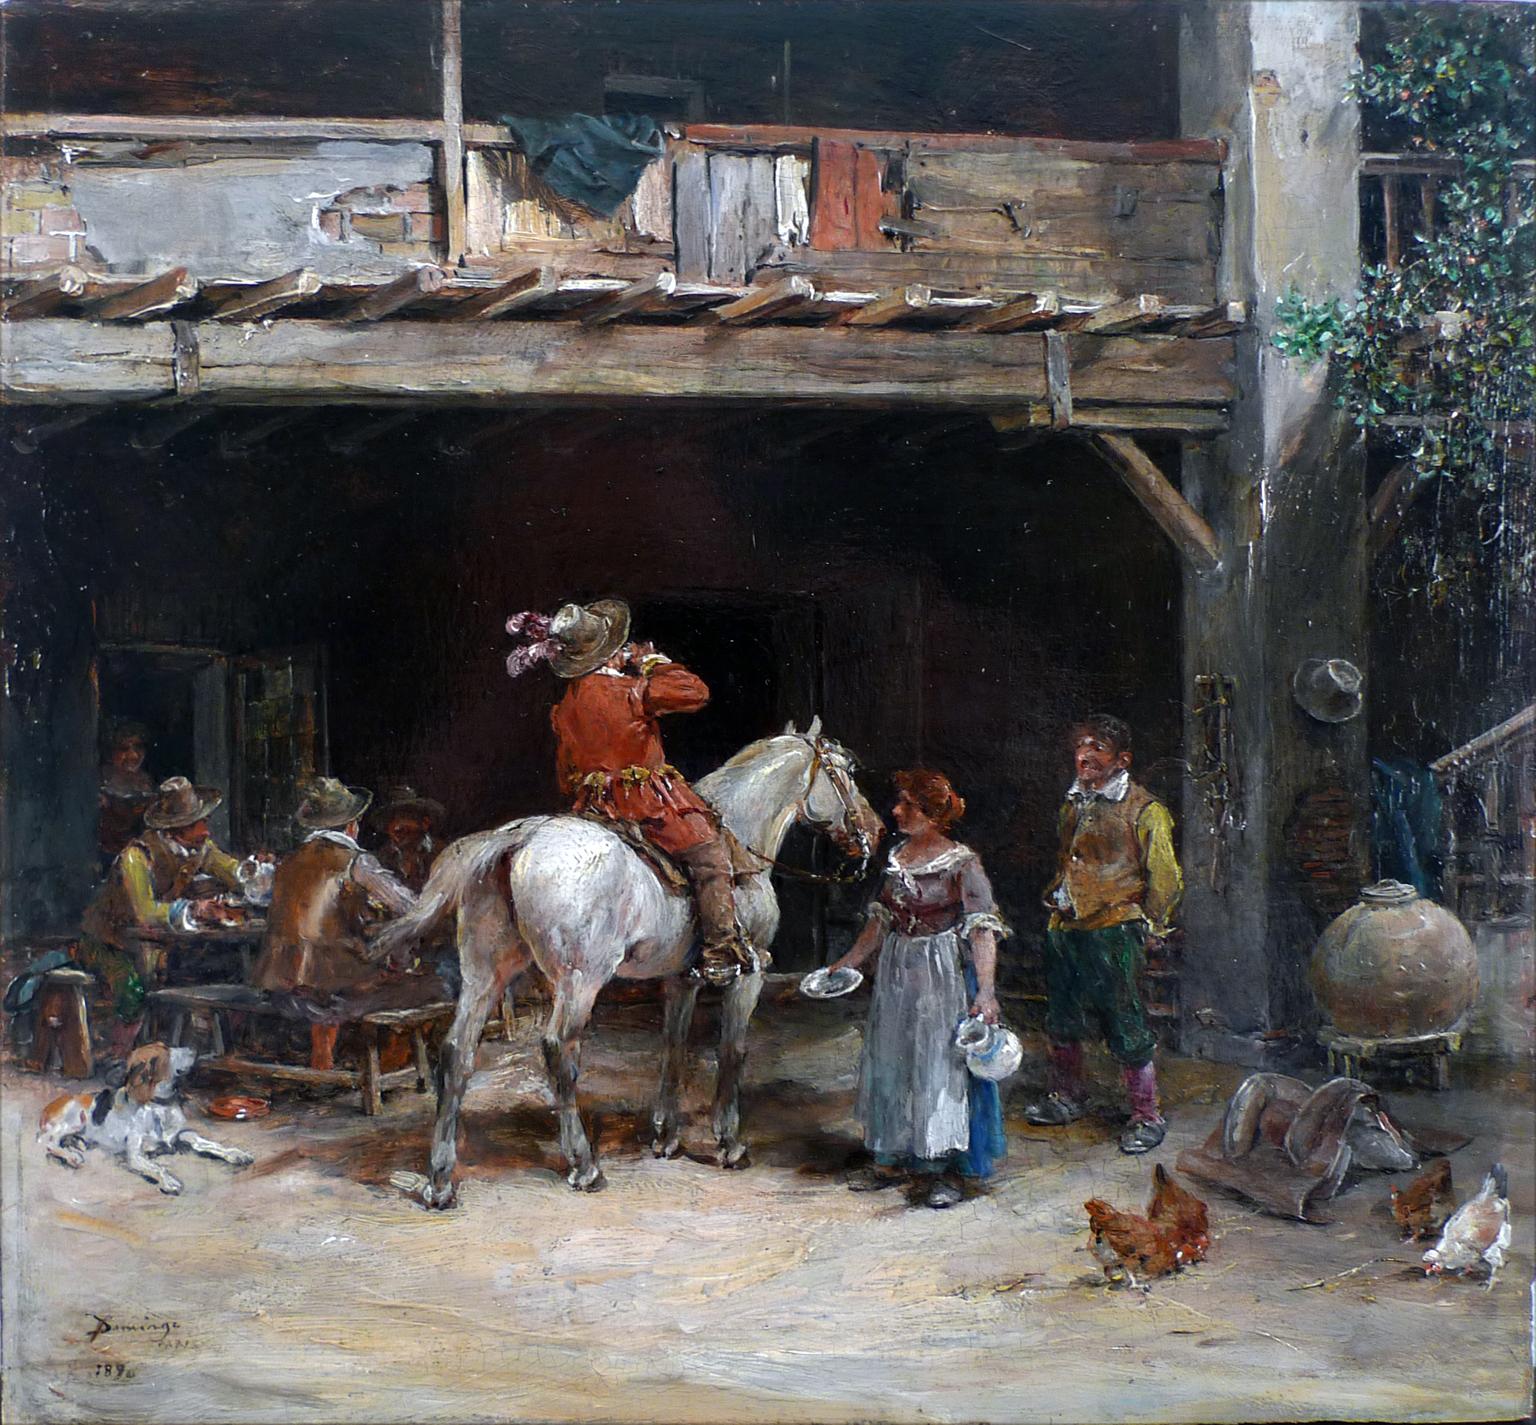 “Rest in The Tavern”, 19th Century Oil on Wood Panel by Francisco Domingo